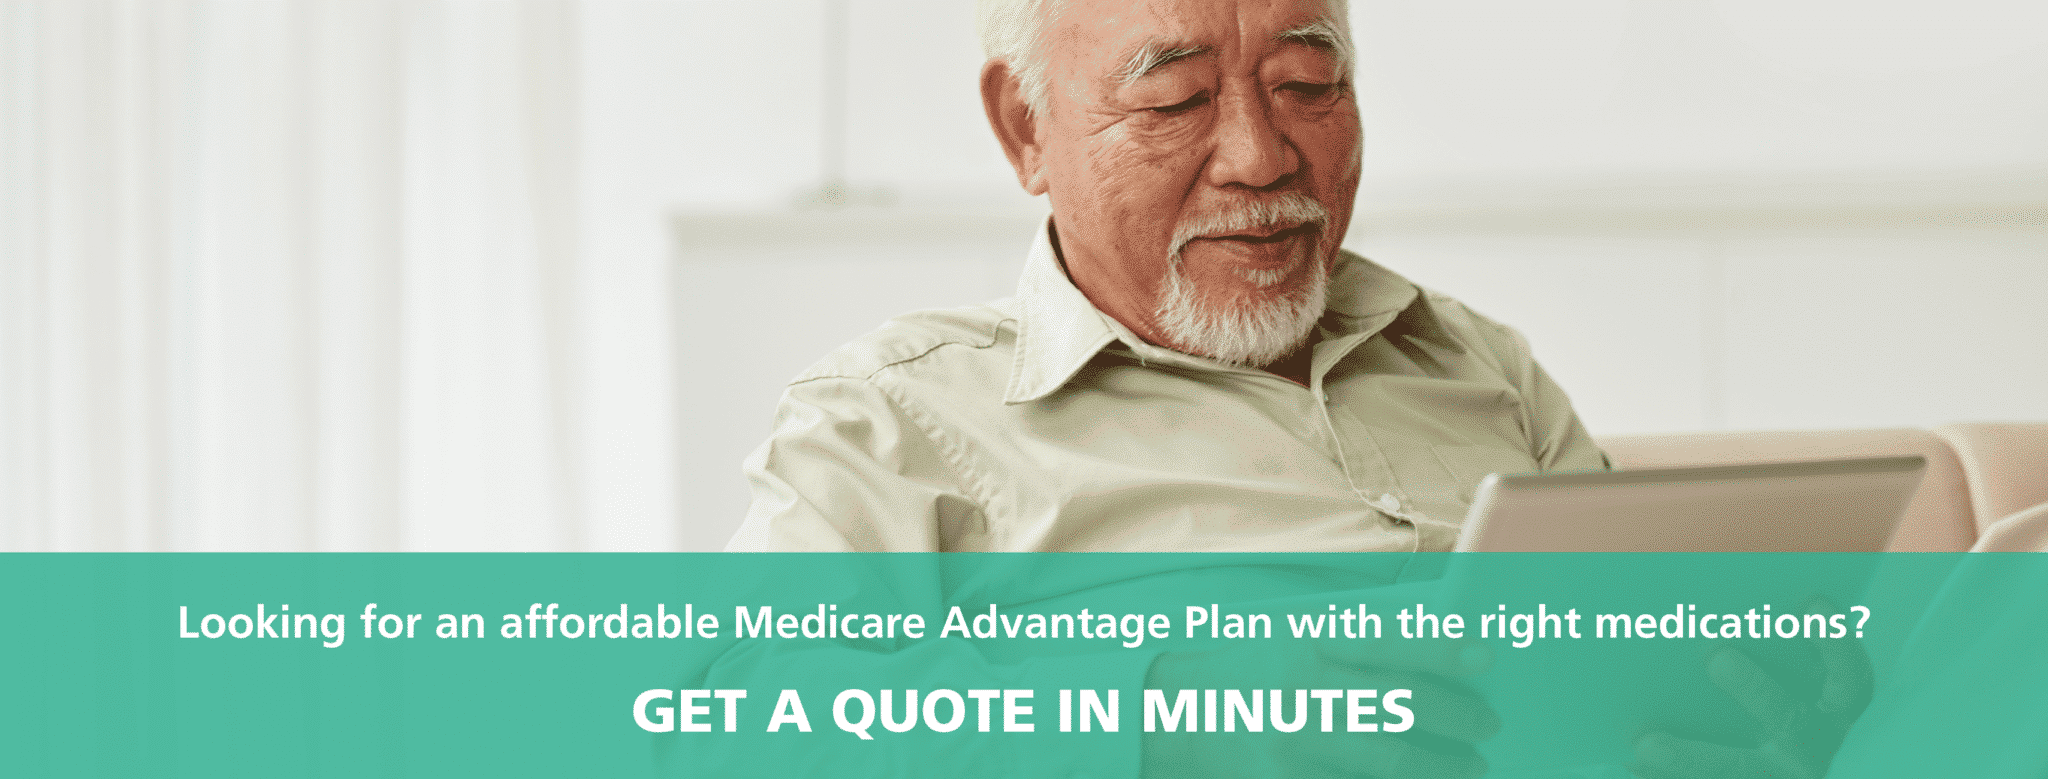 Man using online tool to get medicare quote